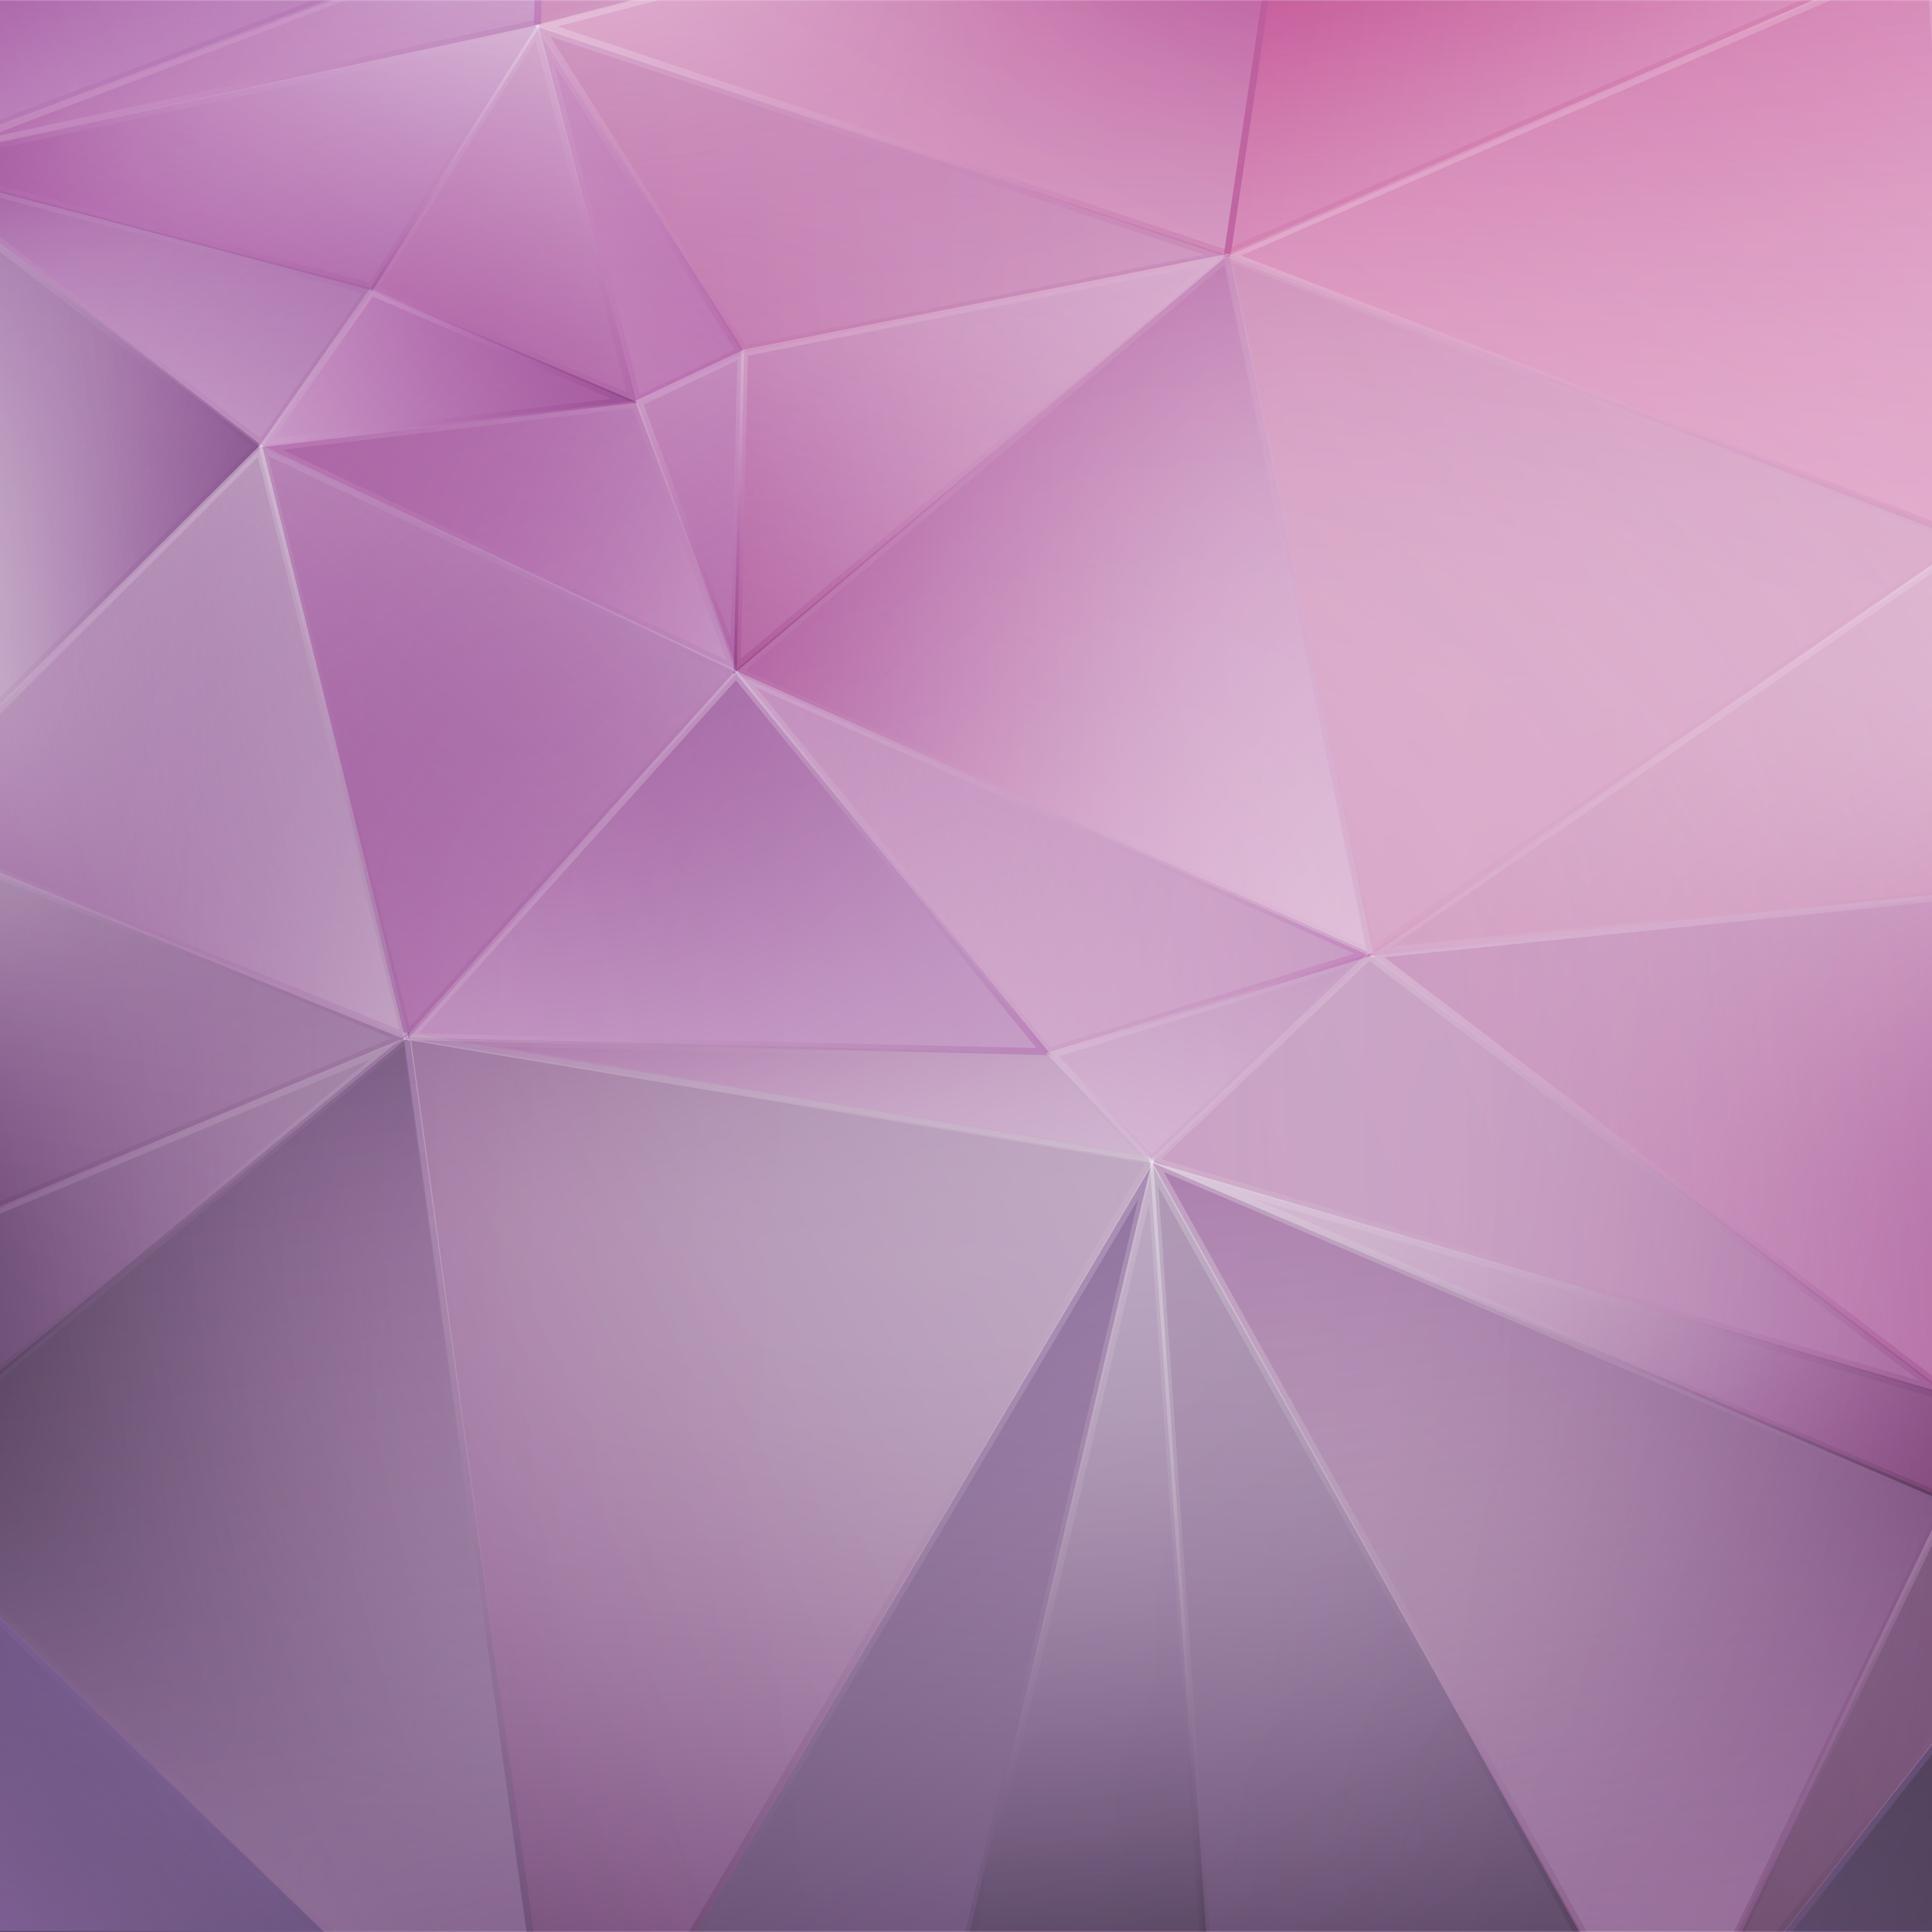 Pink crystal geometric background - Download Free Vectors, Clipart